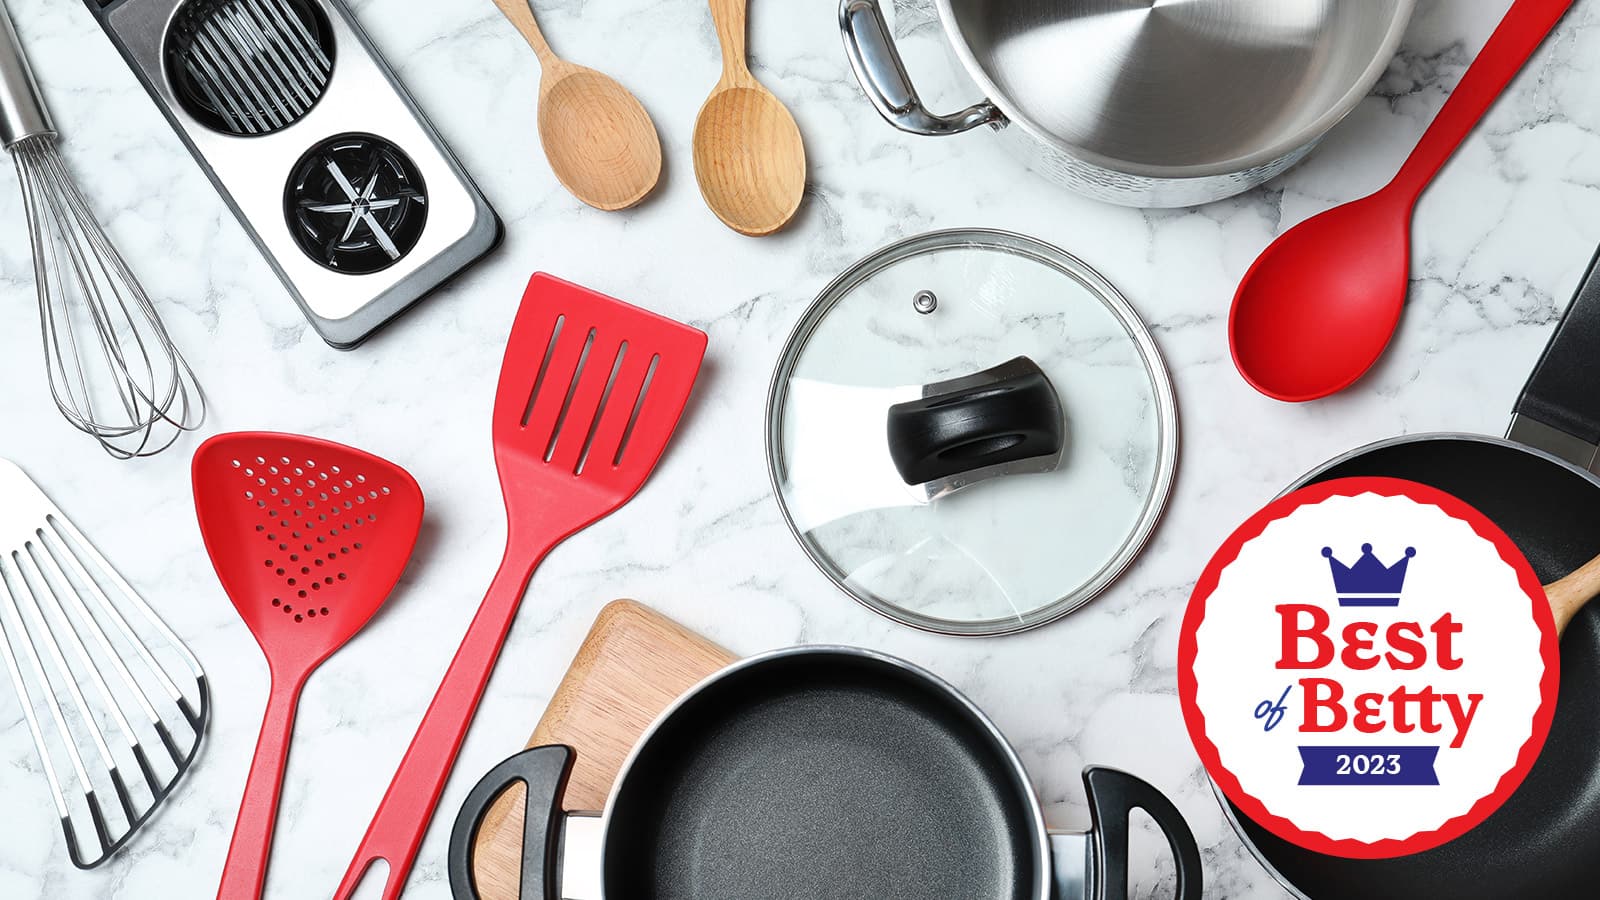 20 Best Kitchen Gadgets You Must Have